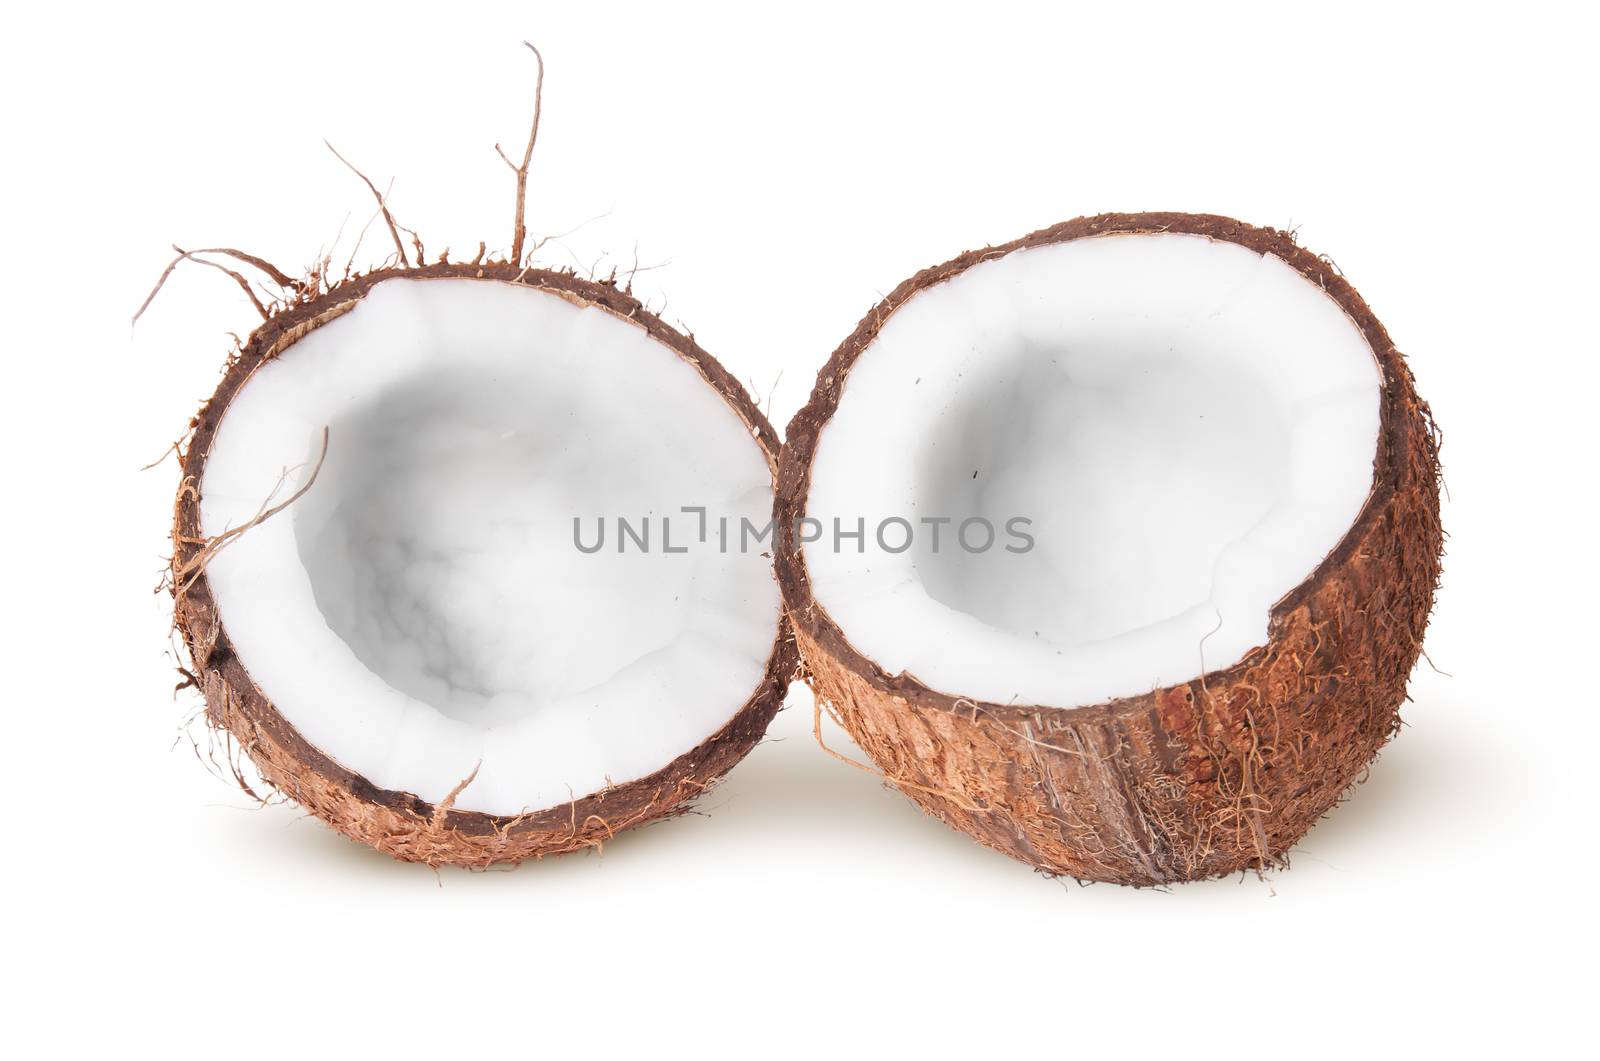 Two halves of coconut lying next by Cipariss